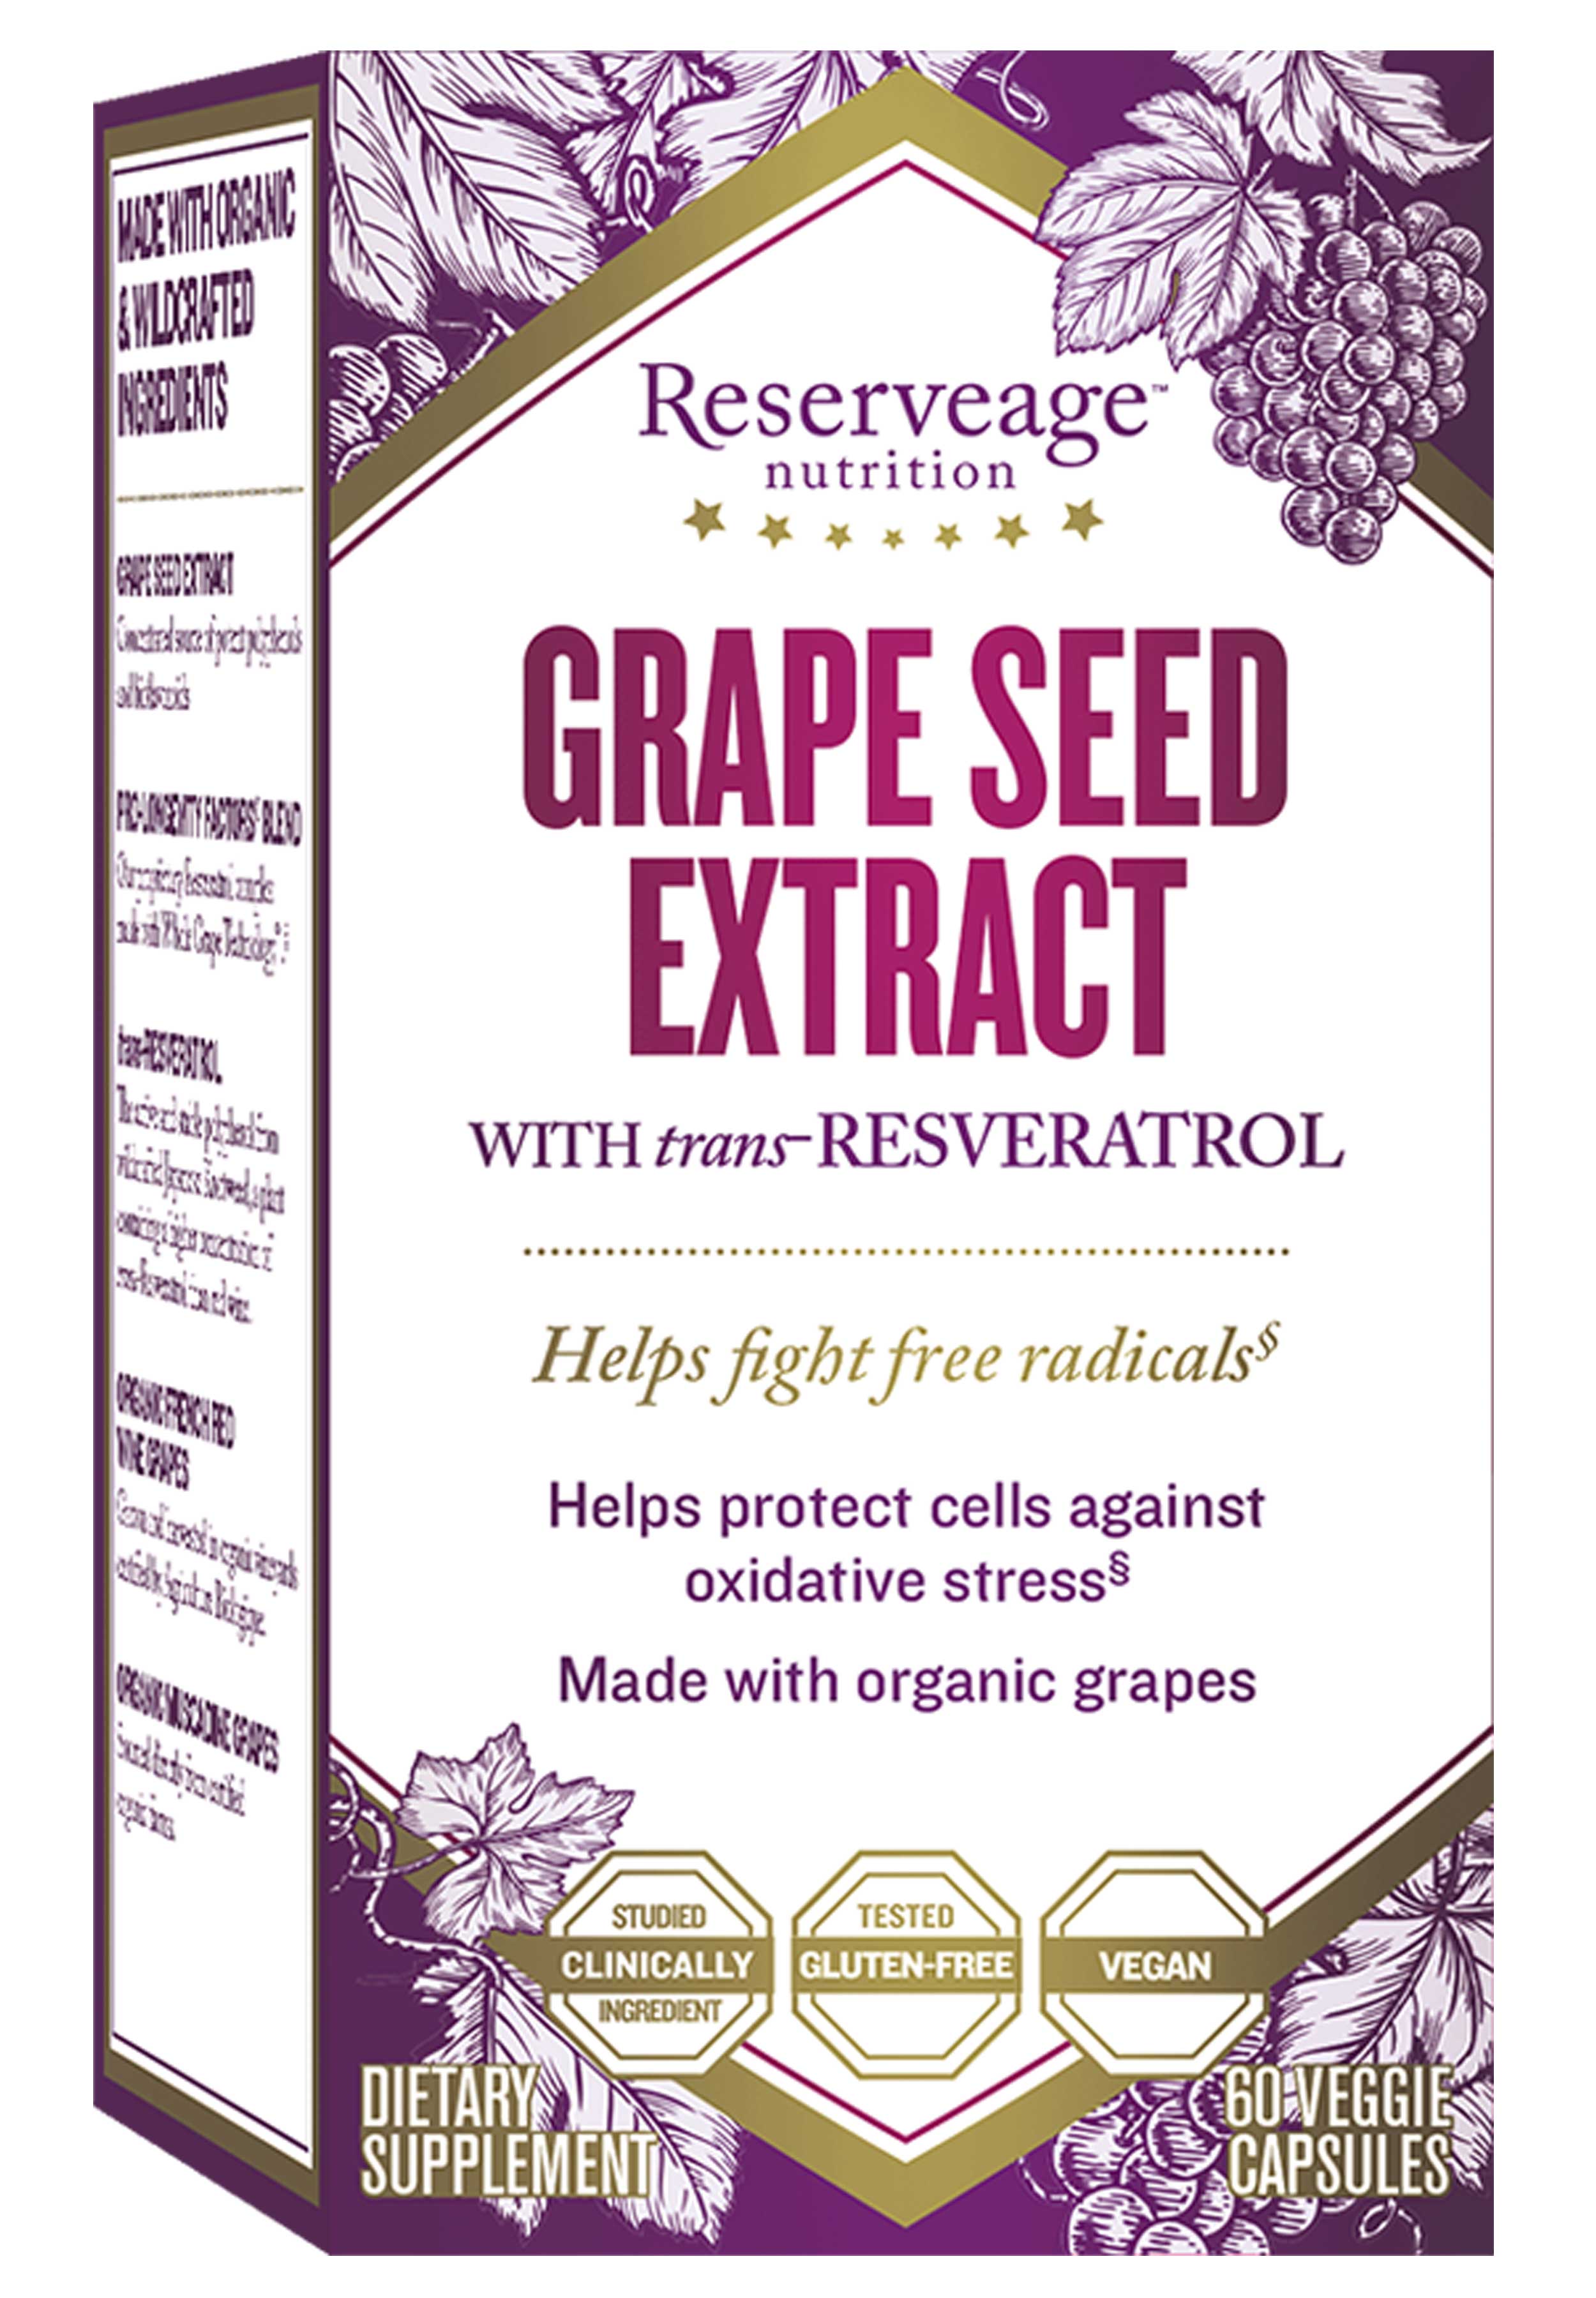 Reserveage Grapeseed Extract